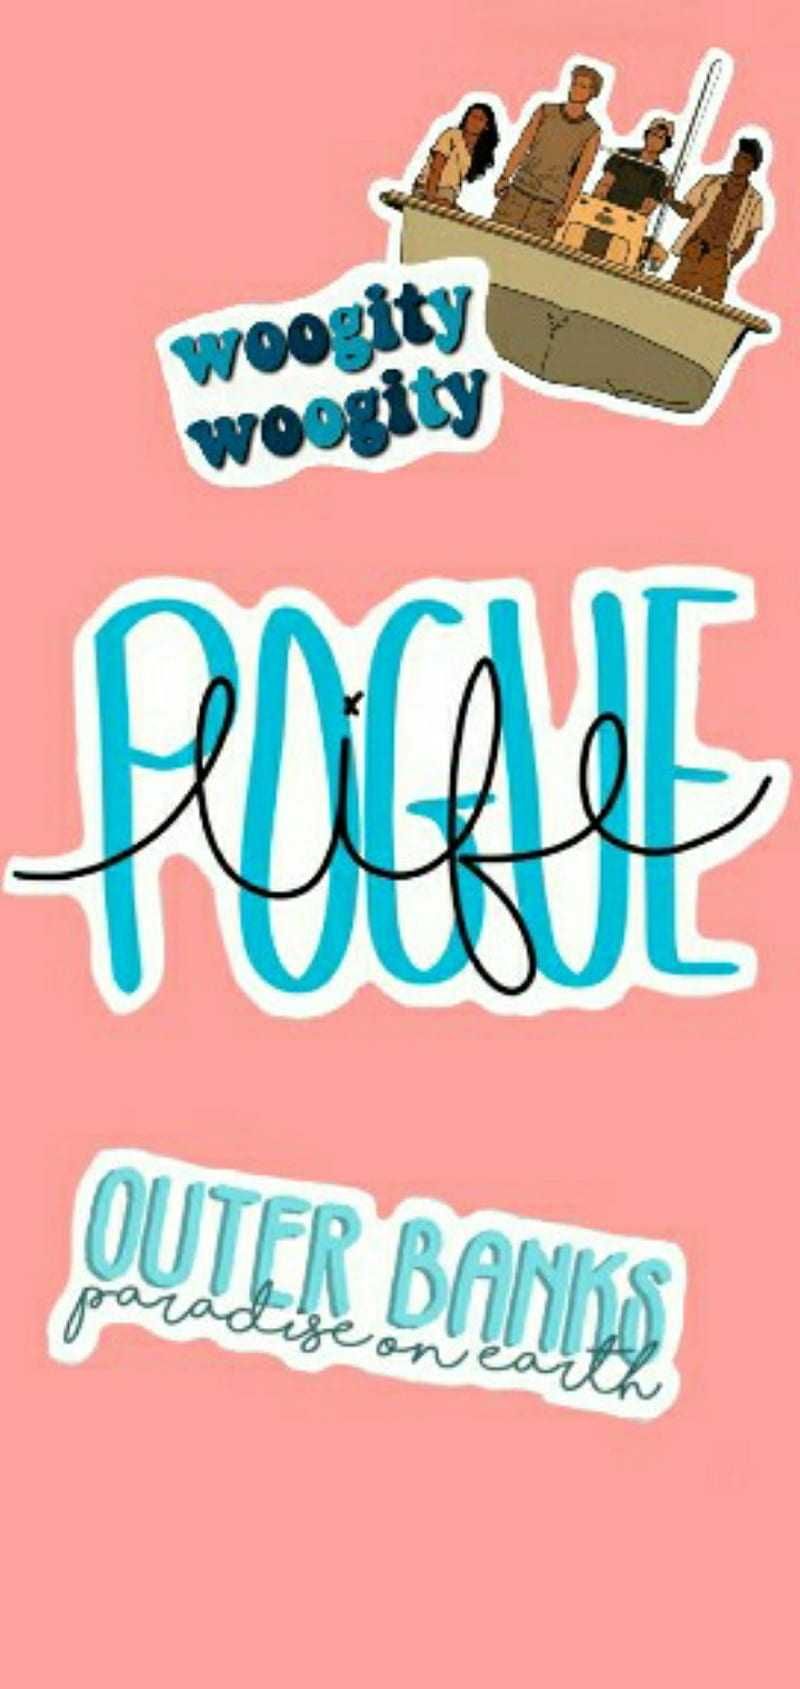 A phone wallpaper with stickers of outer banks and pogue - Rogue